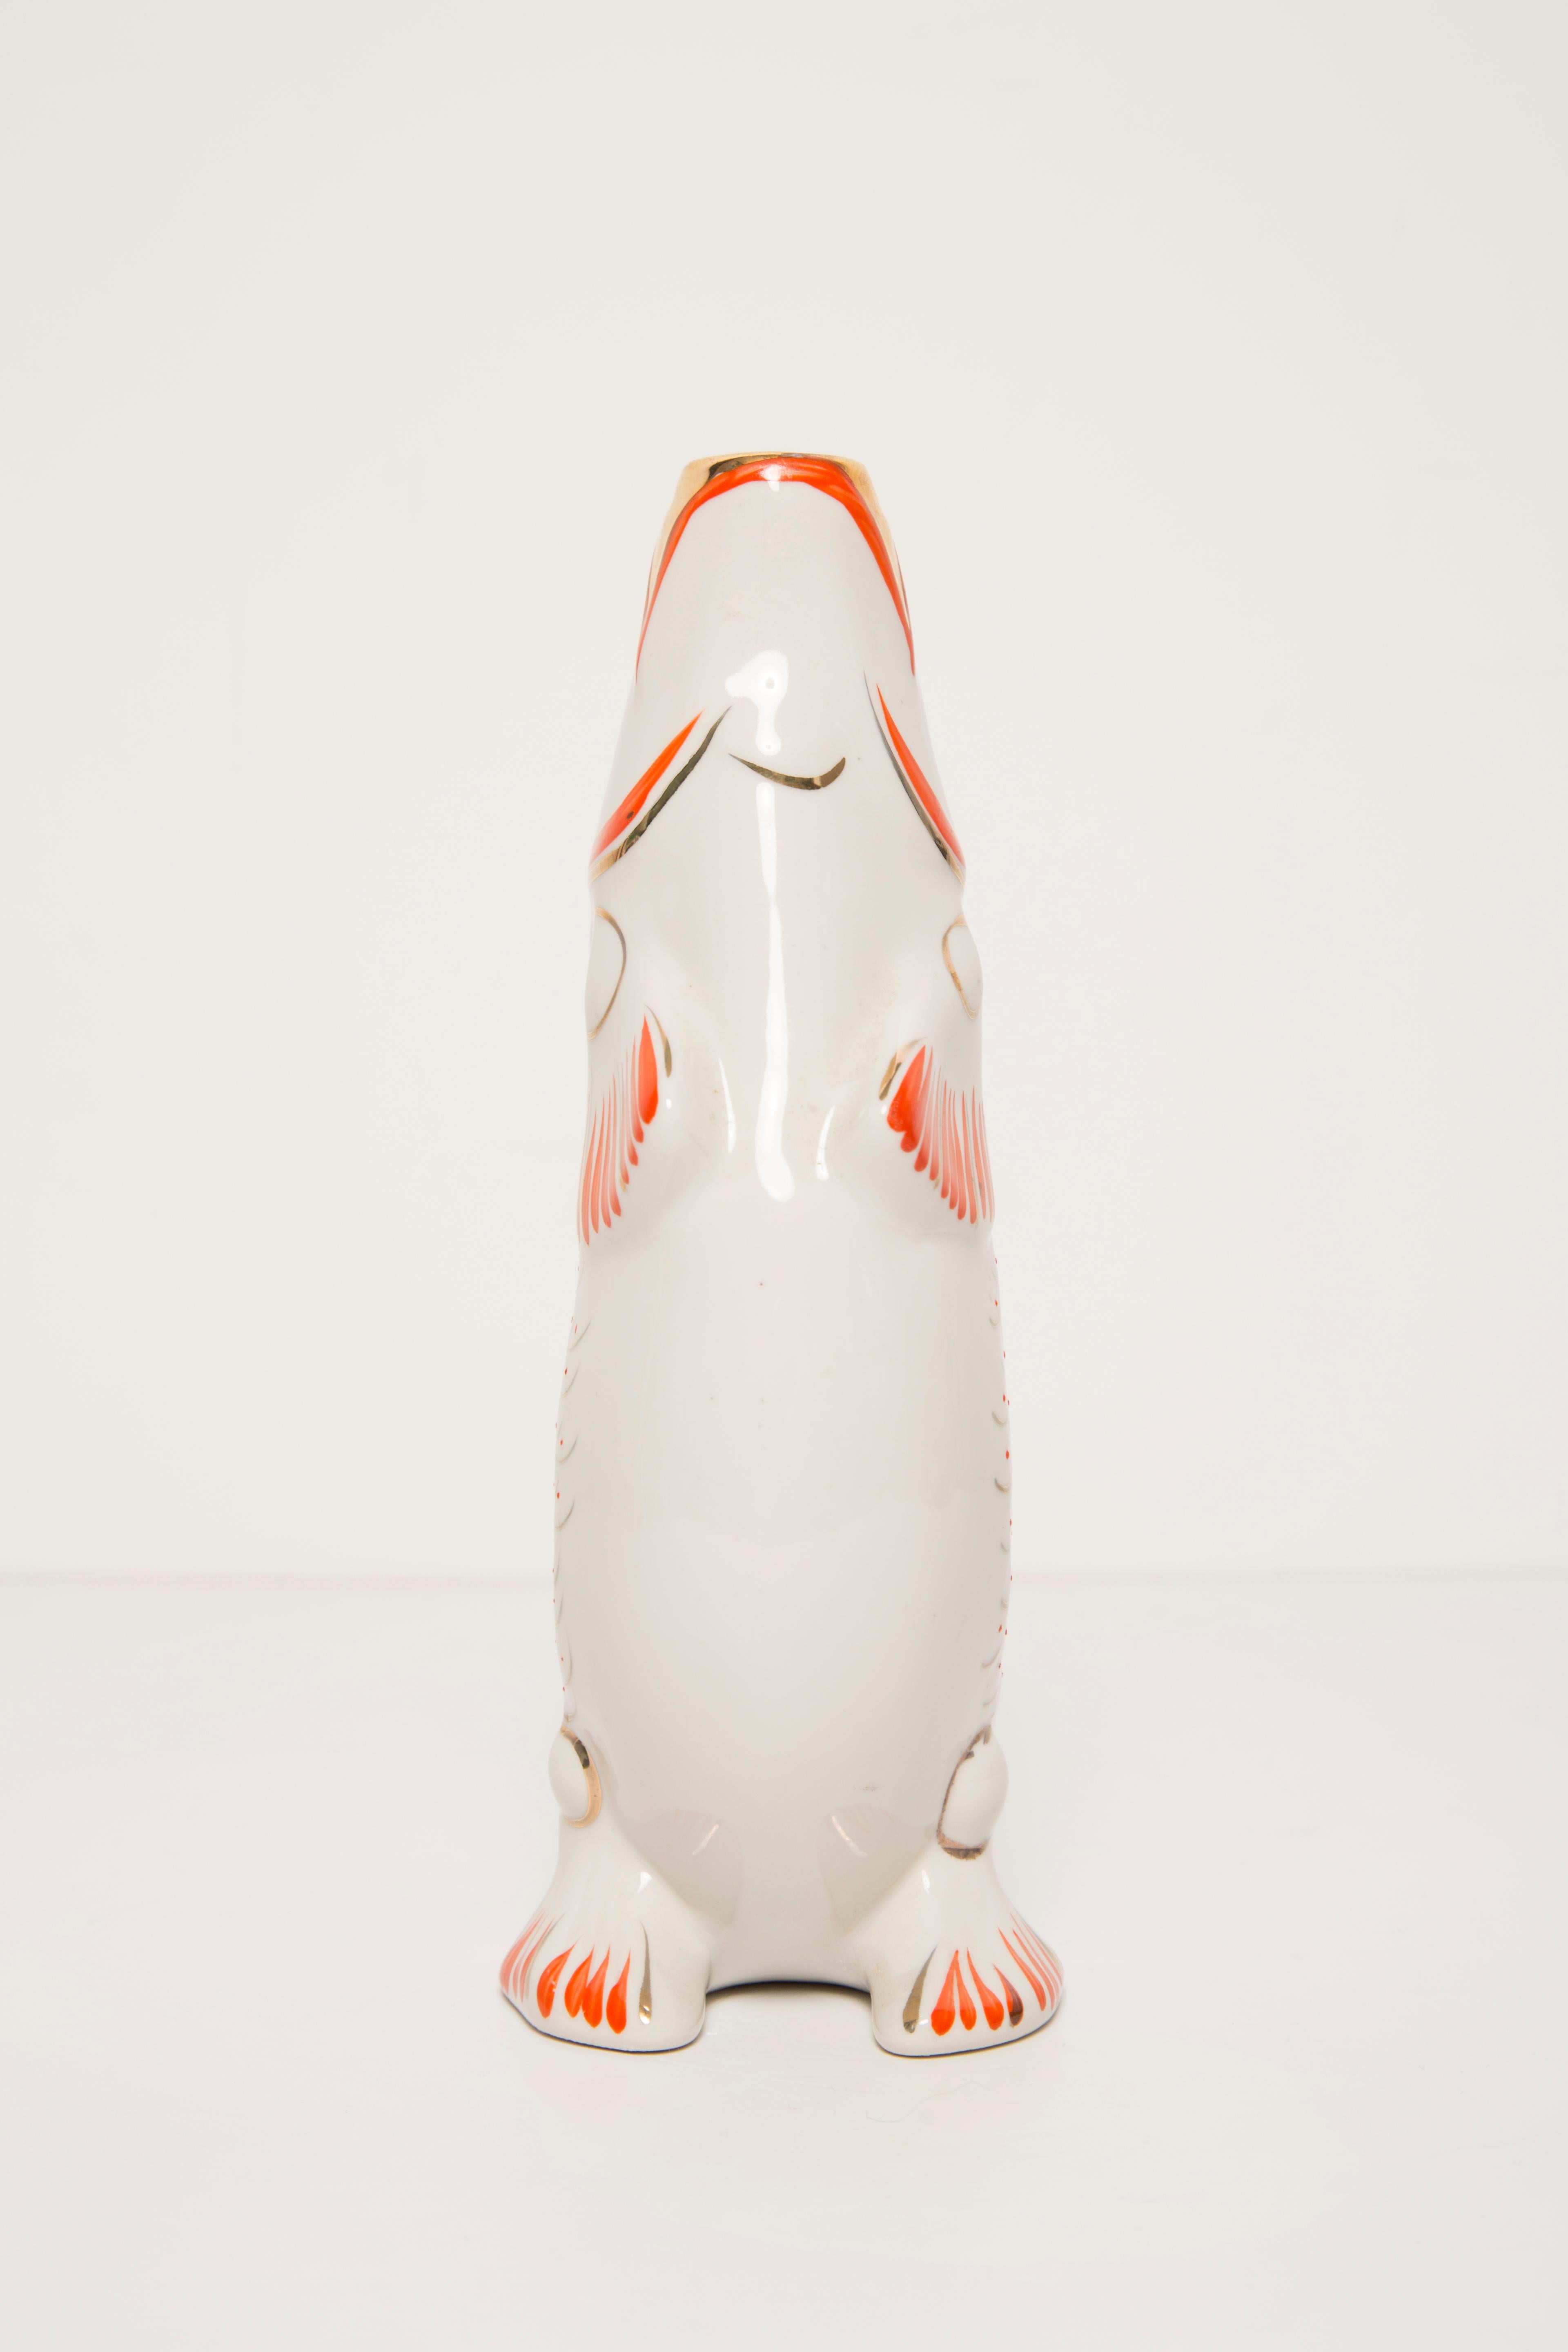 White Fish Glass Decanter or Vase, 20th Century, Europe, 1960s For Sale 4